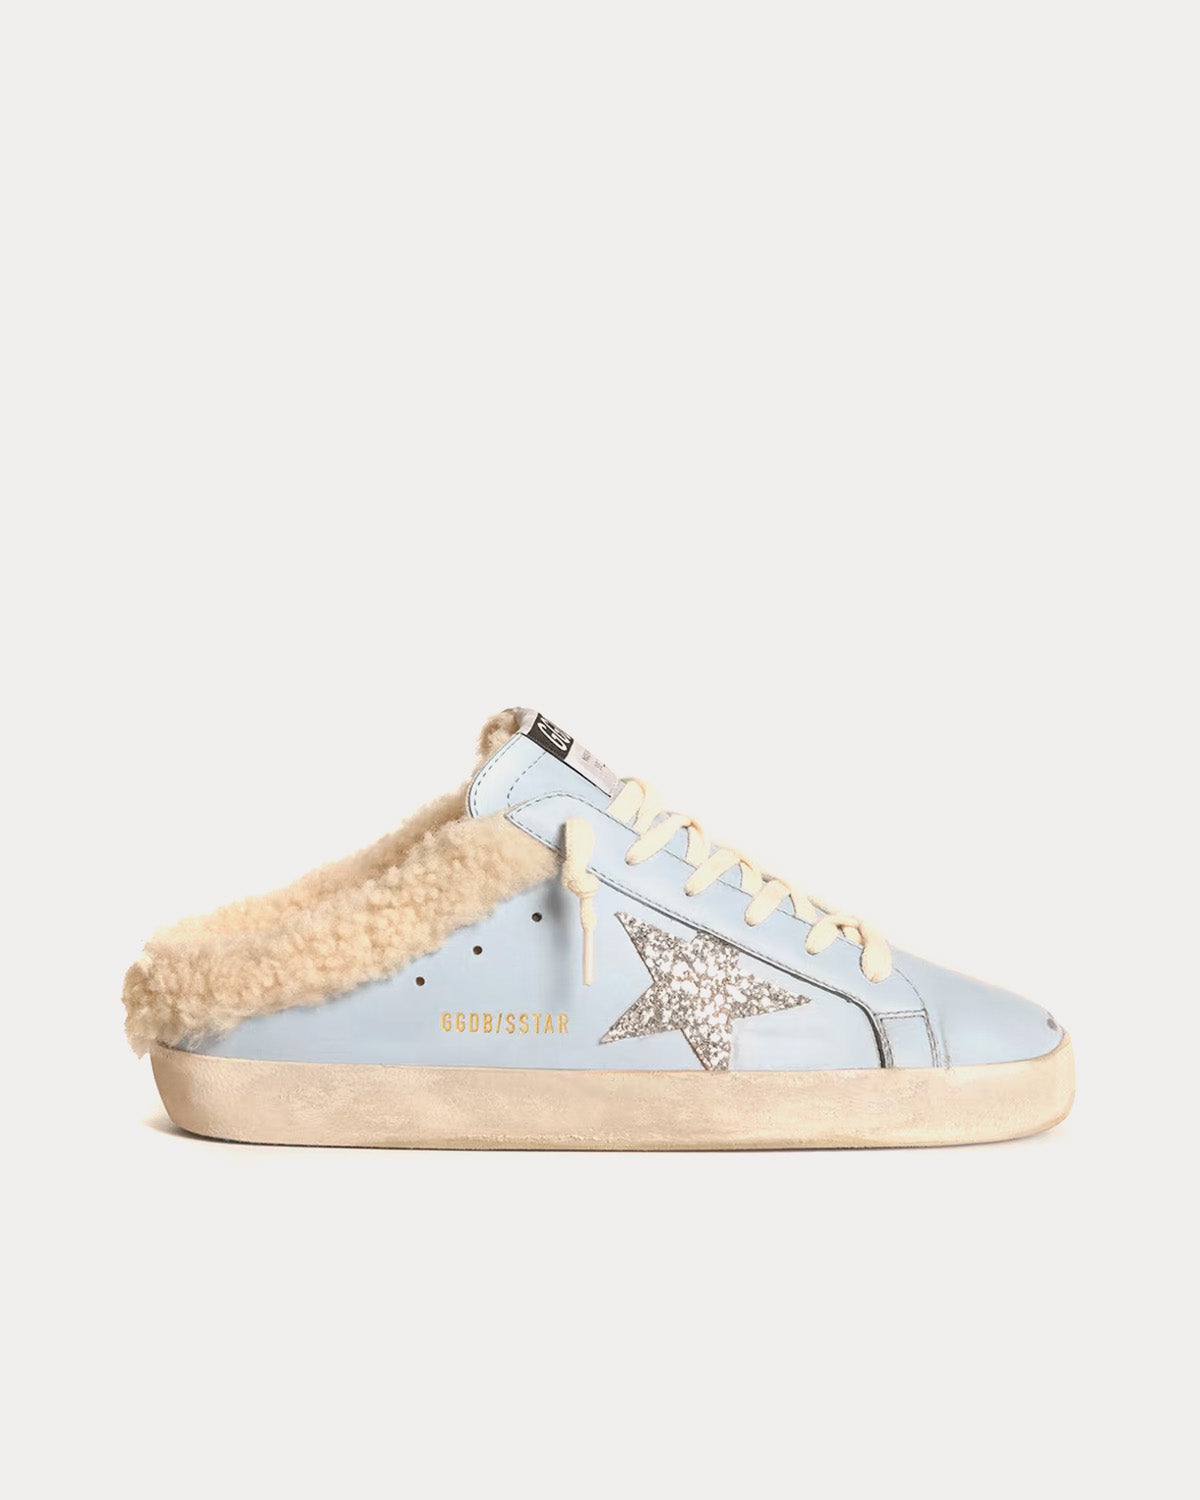 Golden Goose Super-Star Sabots Silver Glitter Star & Shearling Lining  Powder Blue Low Top Sneakers - Sneak in Peace